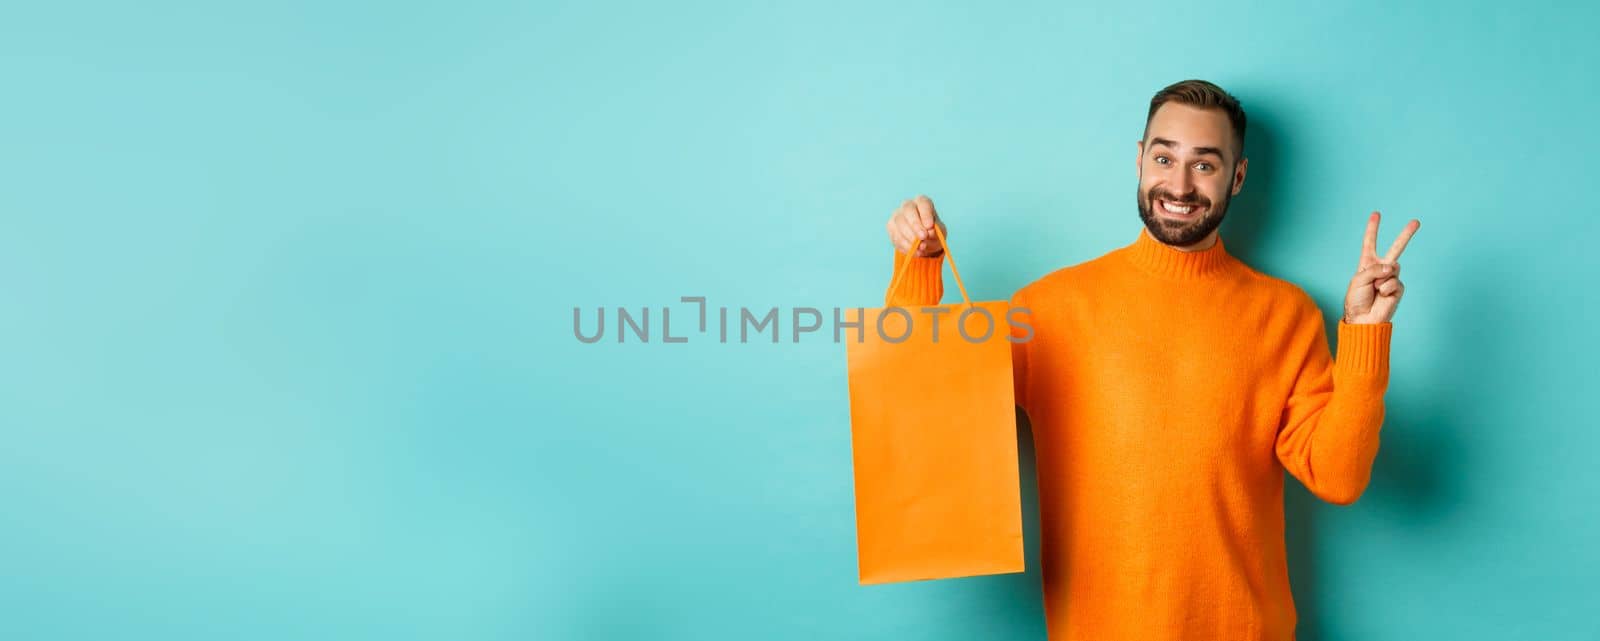 Happy young man showing peace sign and orange shopping bag, smiling pleased, standing over turquoise background. Copy space